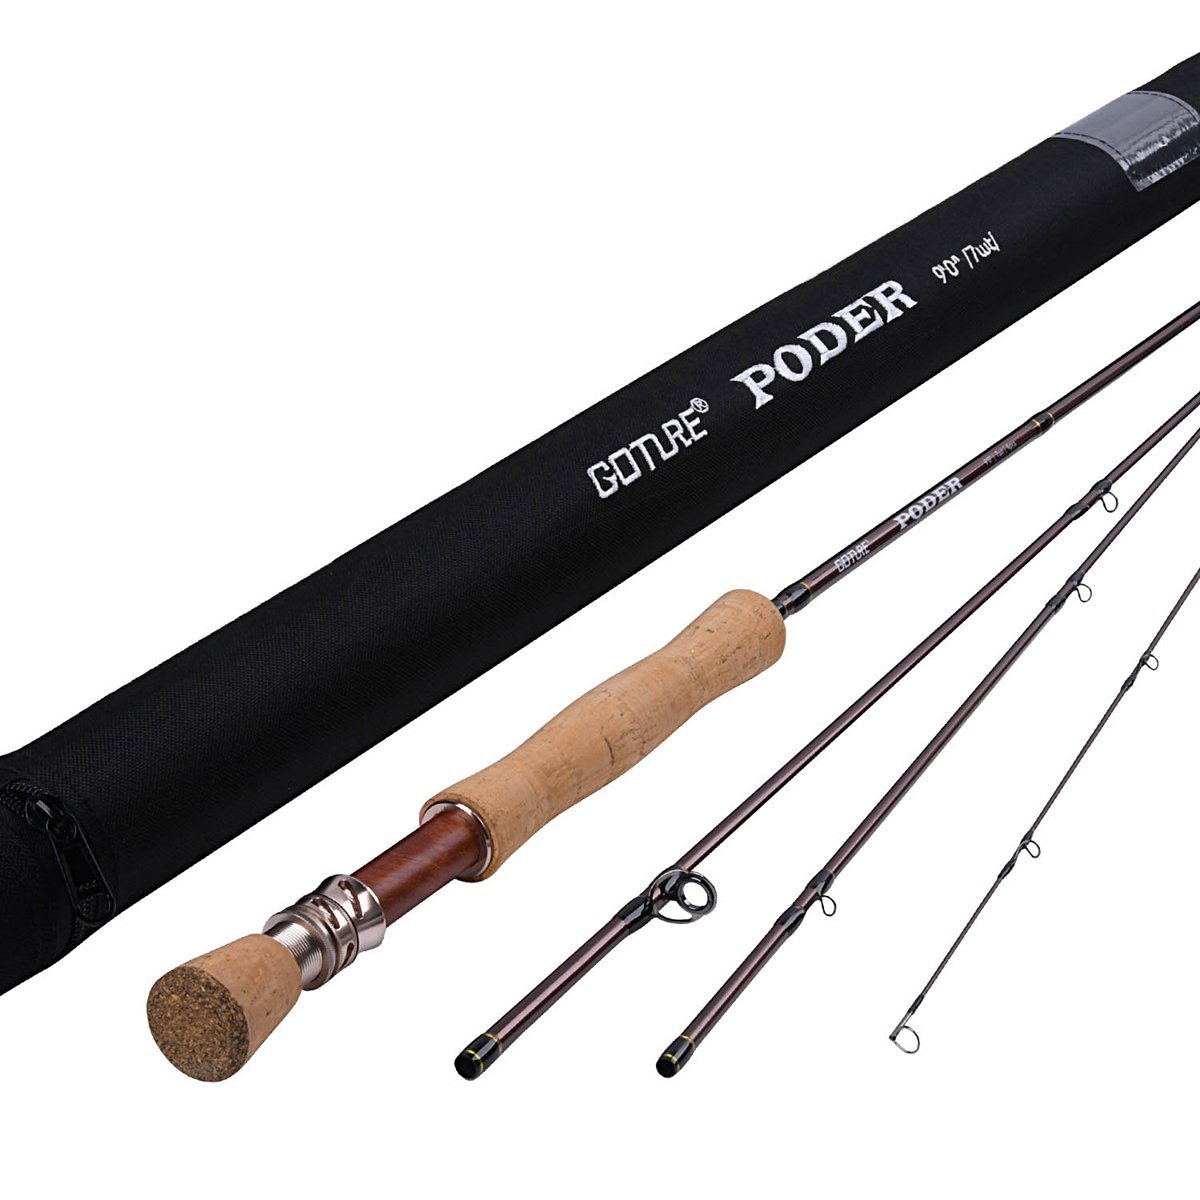 Goture 4 Pieces Travel Fishing Rod Spinning Fishing Rods